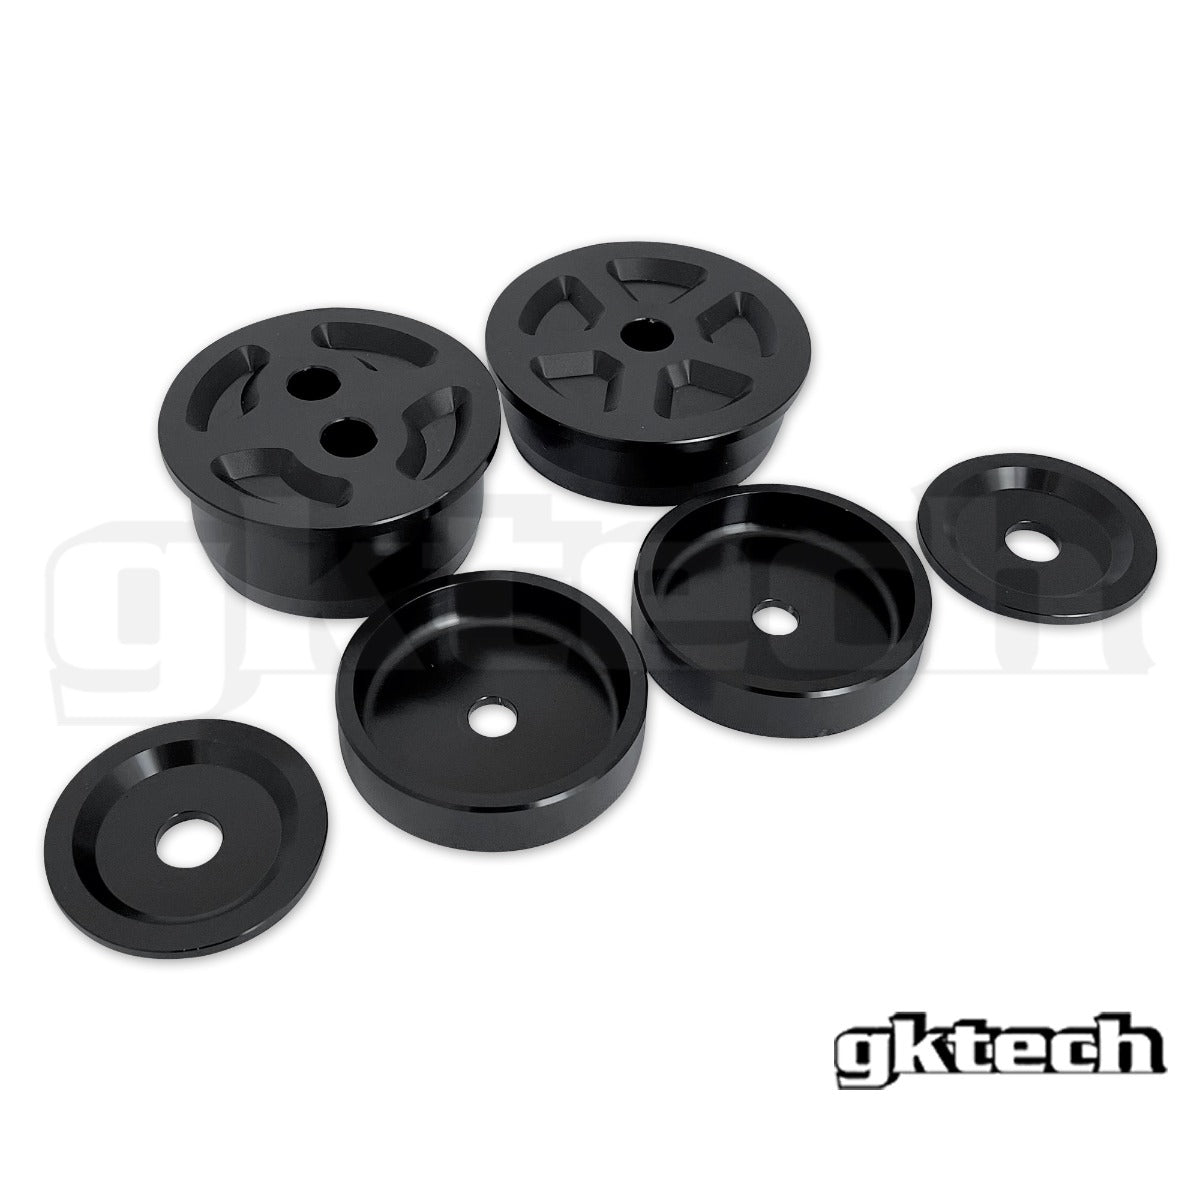 86 / GR86 / BRZ chassis Solid diff bushes